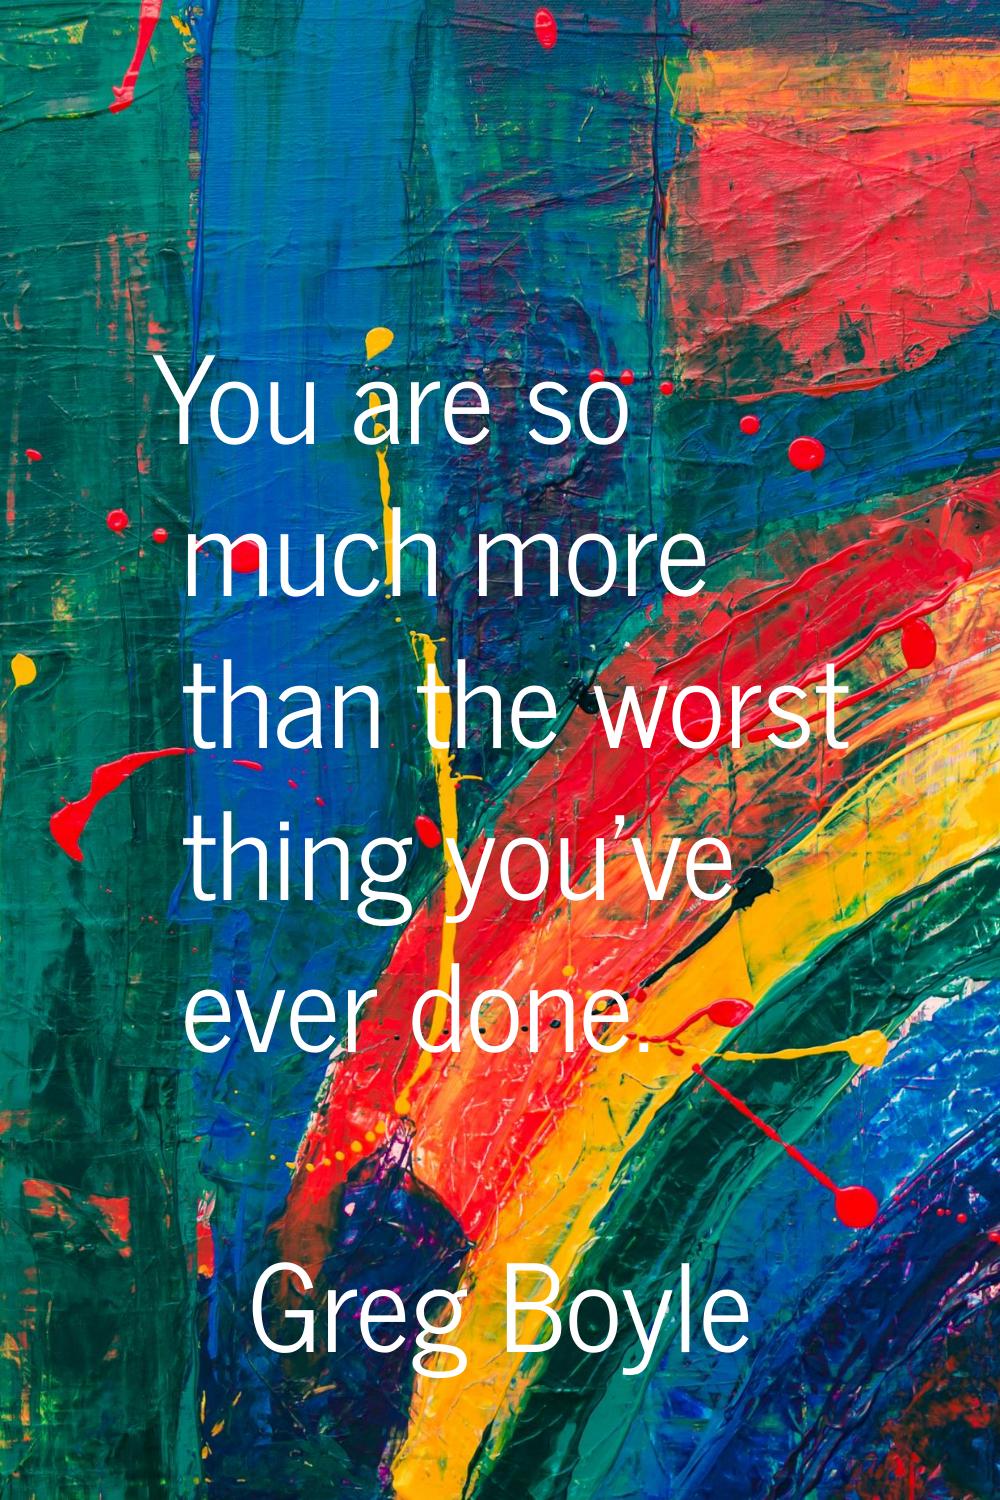 You are so much more than the worst thing you've ever done.